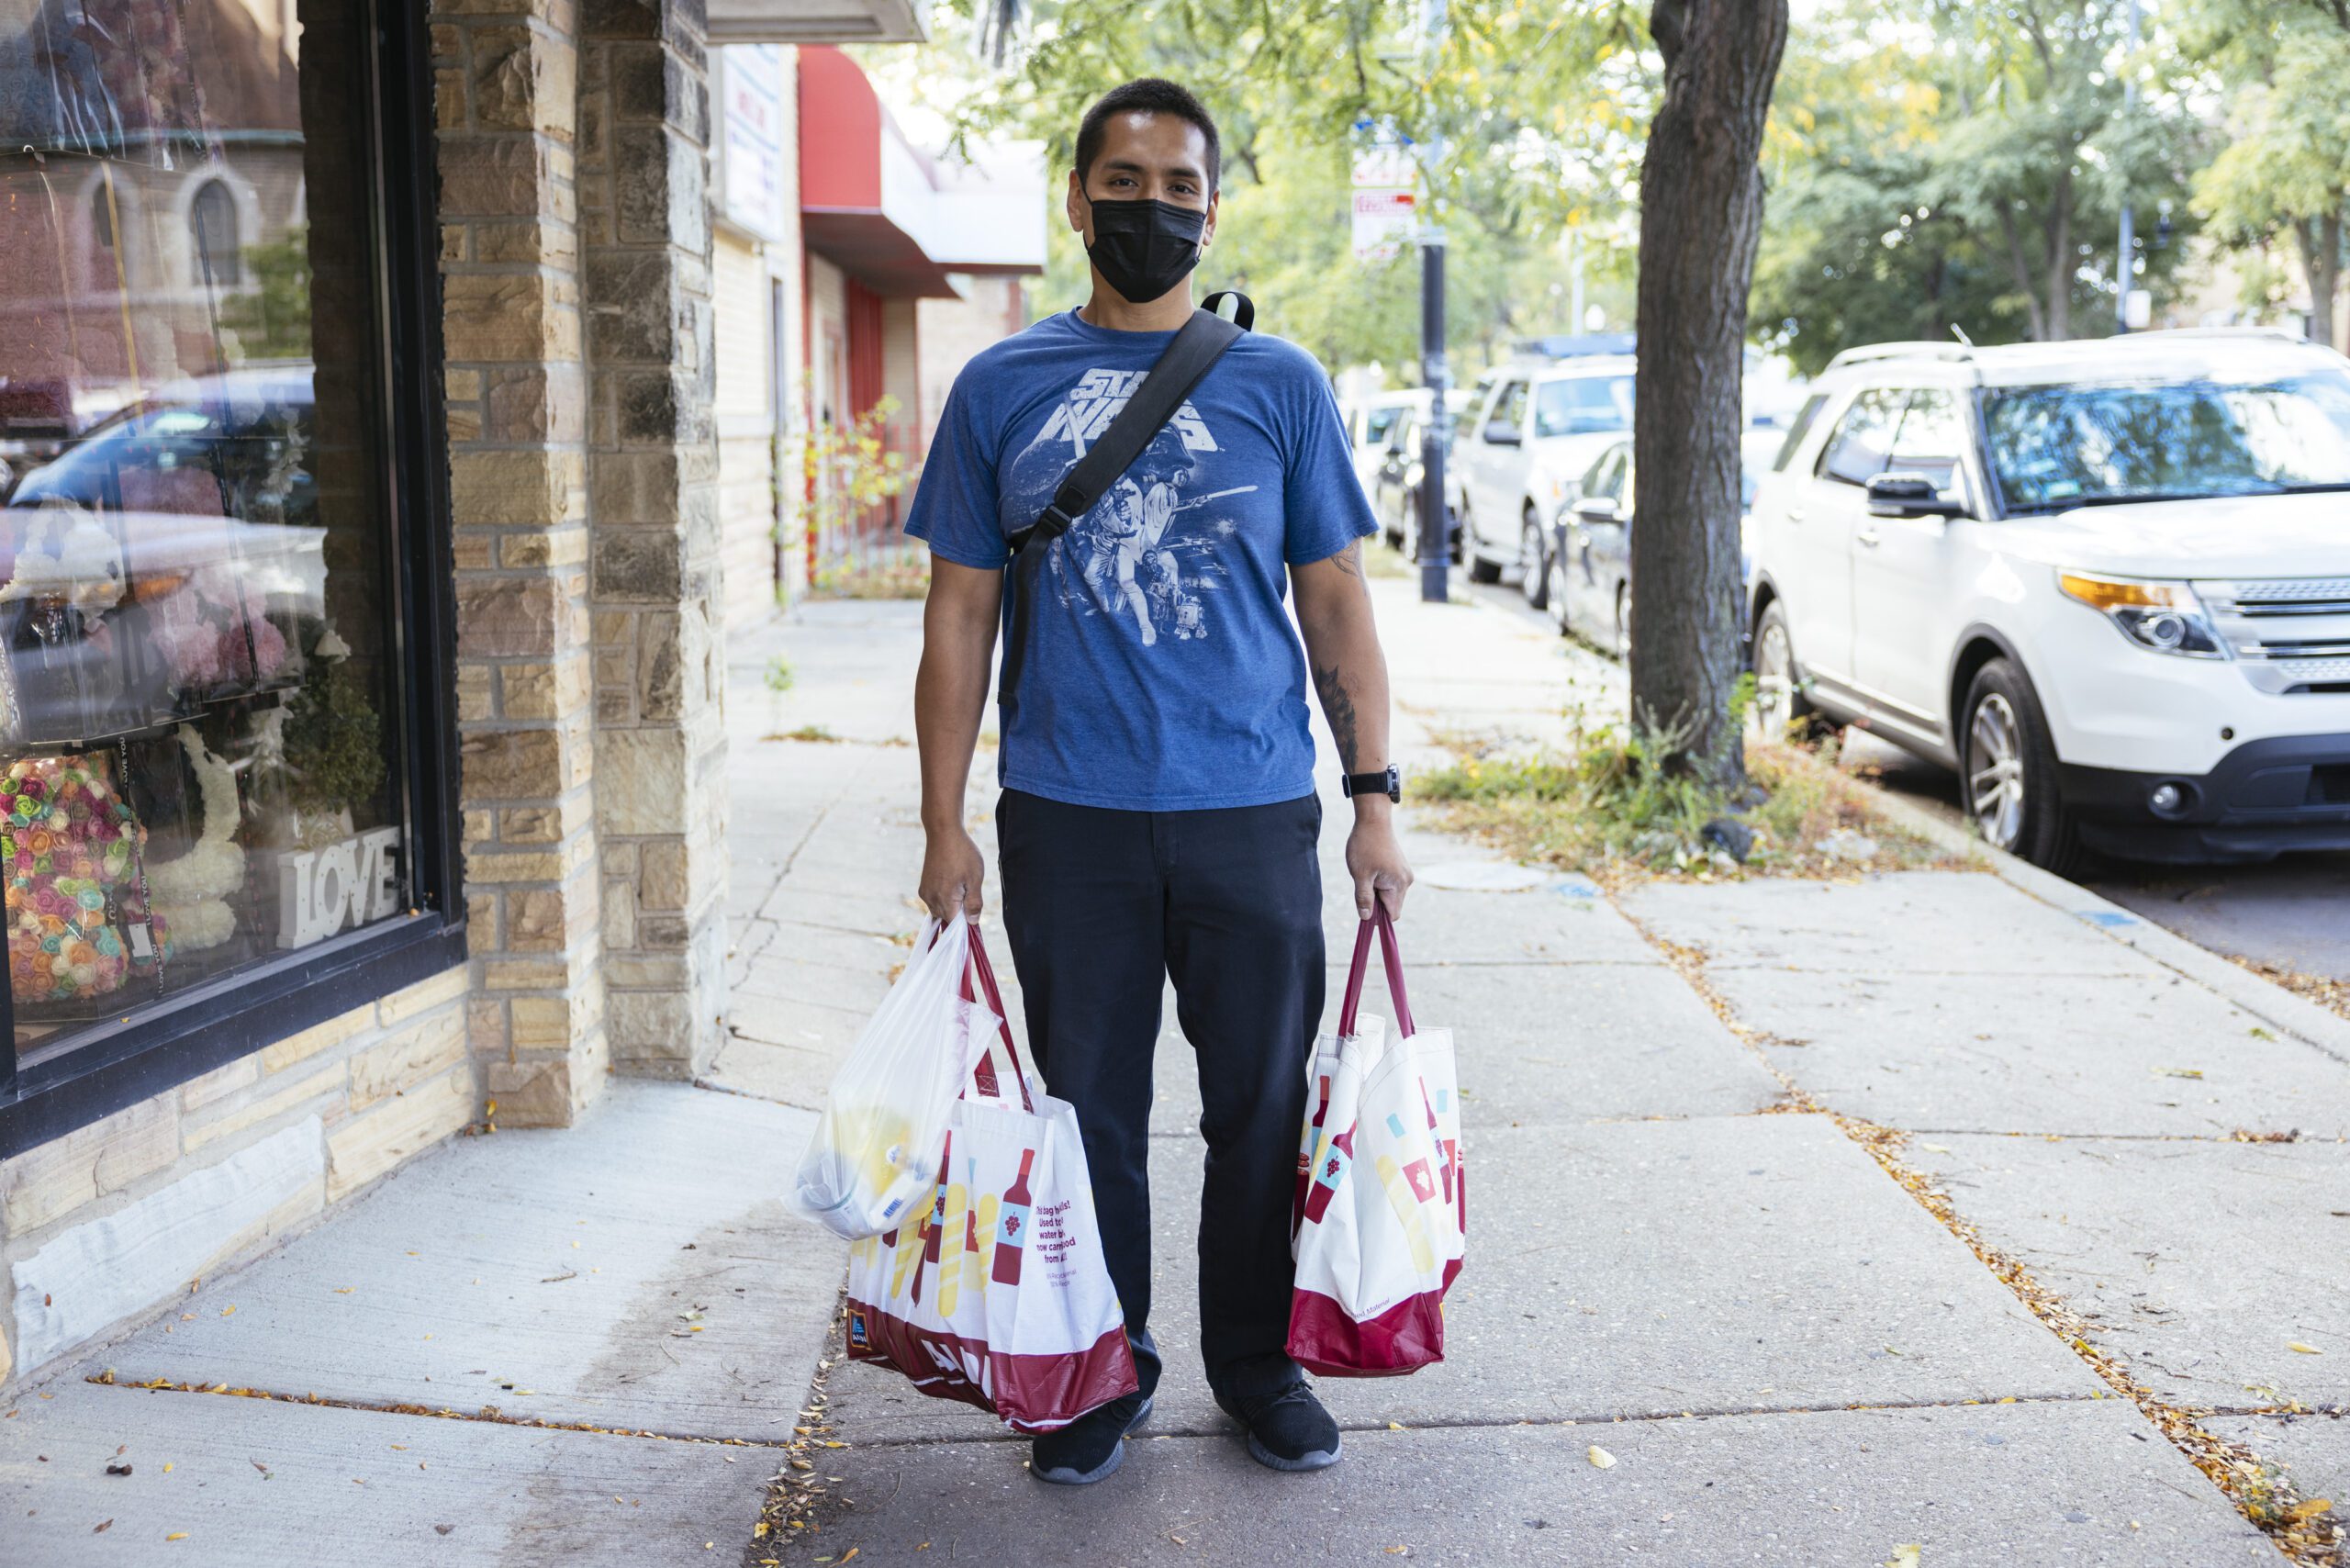 A man carrying groceries wearing a face mask